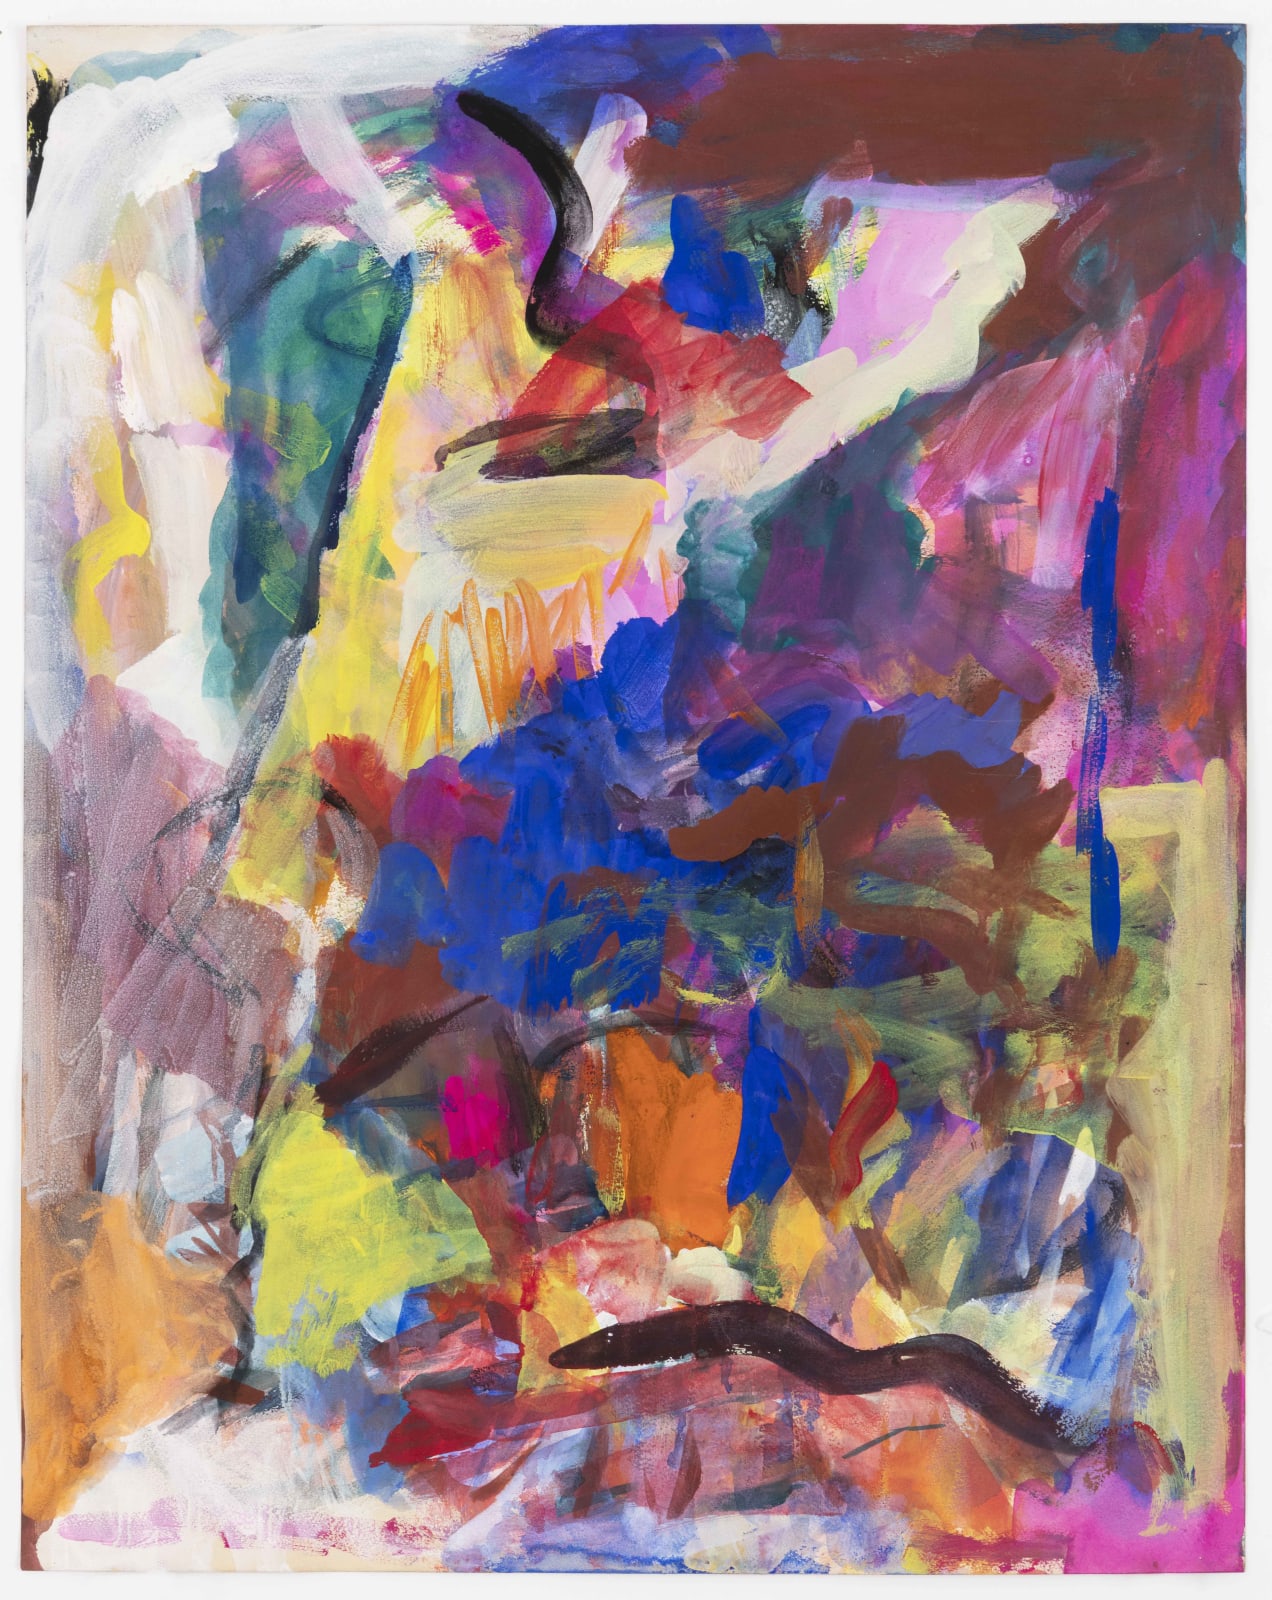 Shirley Jaffe Untitled, 1960 ca. Mixed media on paper 67 x 56 x 3,5 cm (26 3/8 x 22 1/16 x 1 3/8 in) framed